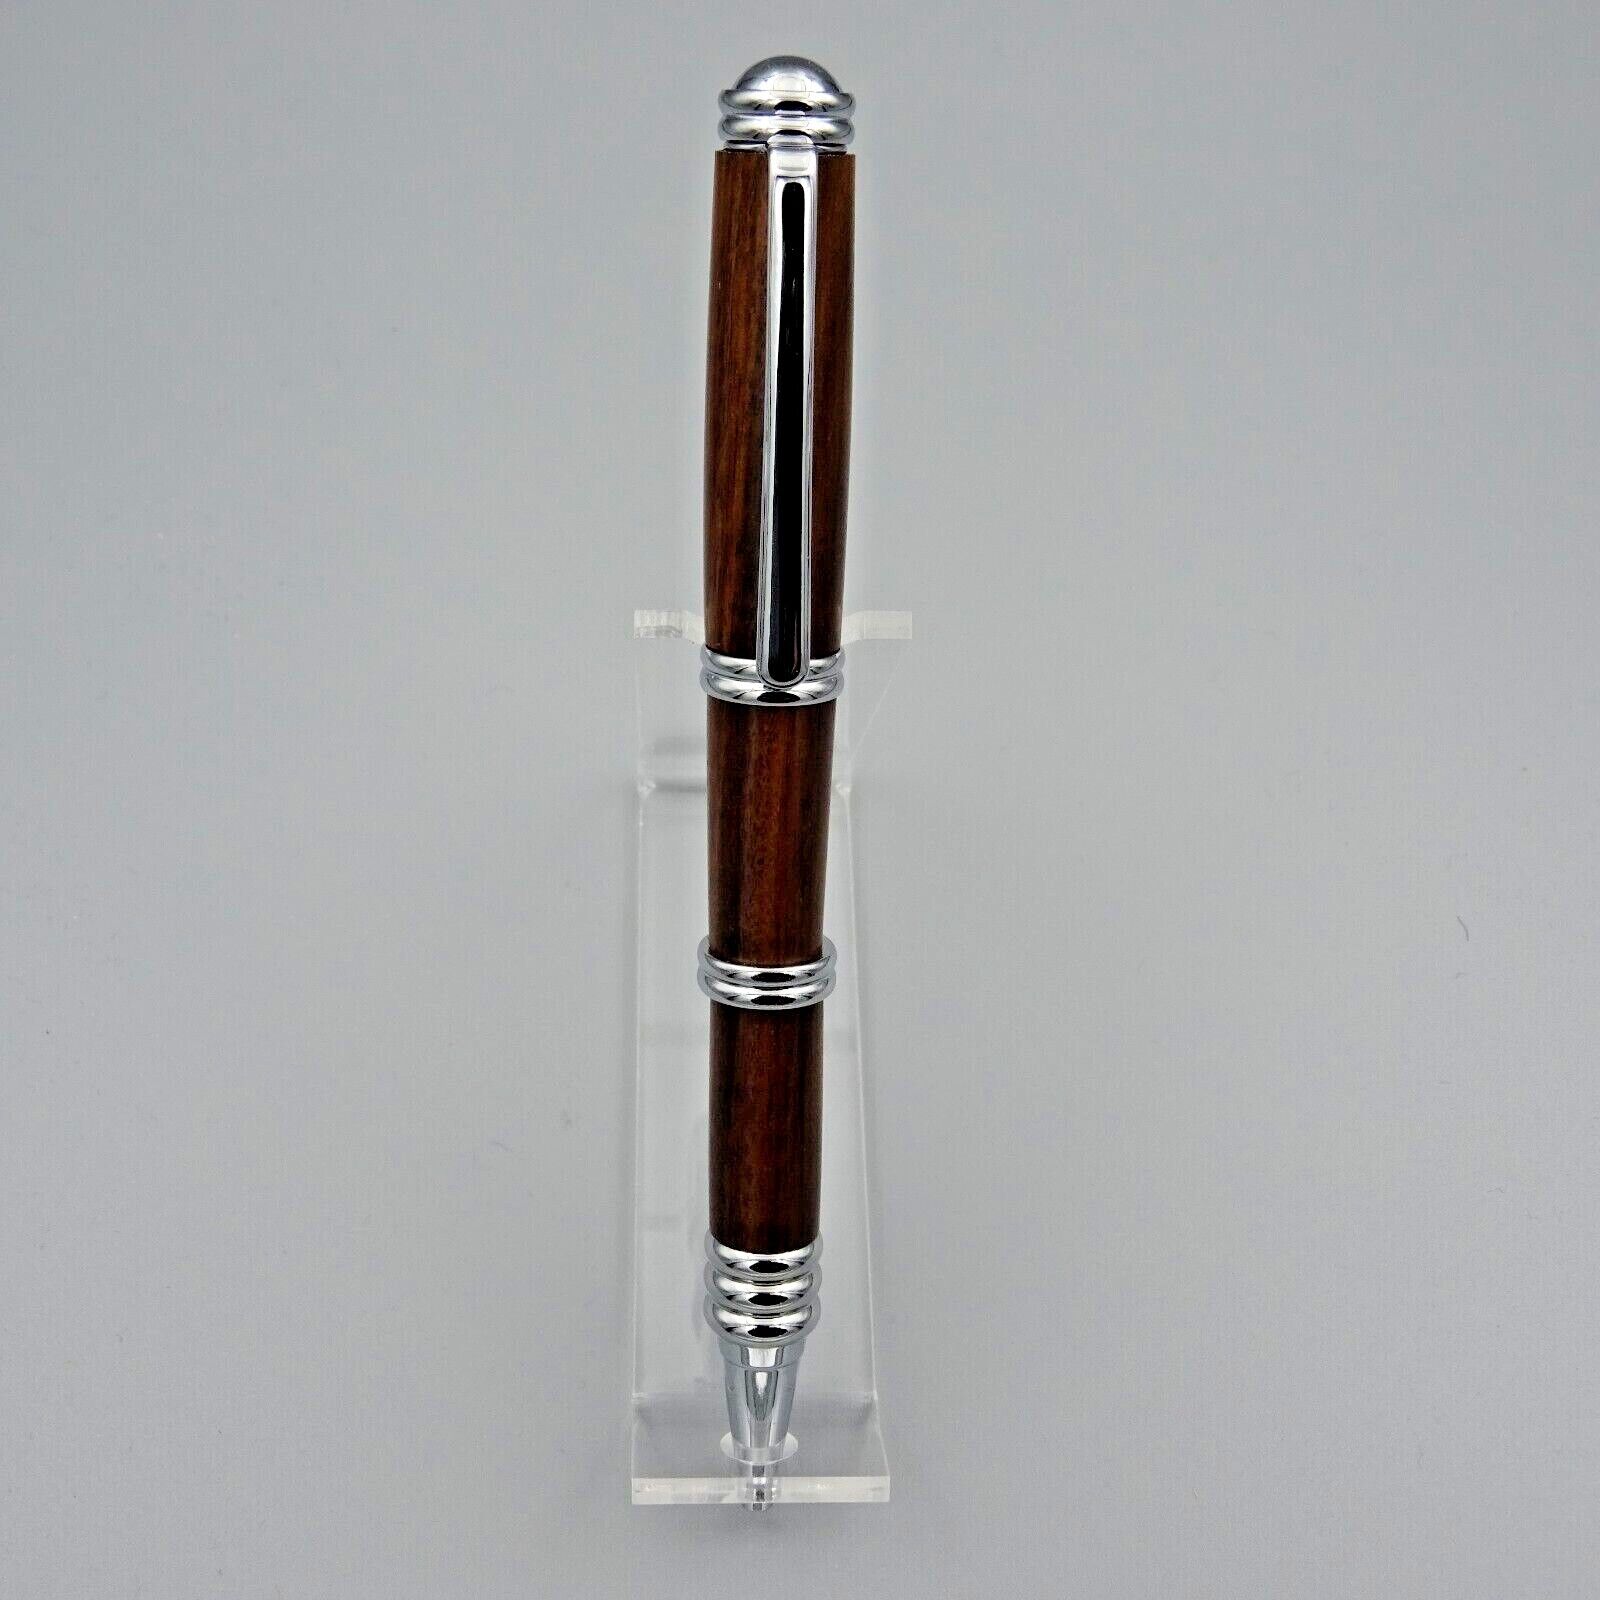 SEGMENTED TWIST PEN with ROSEWOOD BARREL and CHROME TRIM